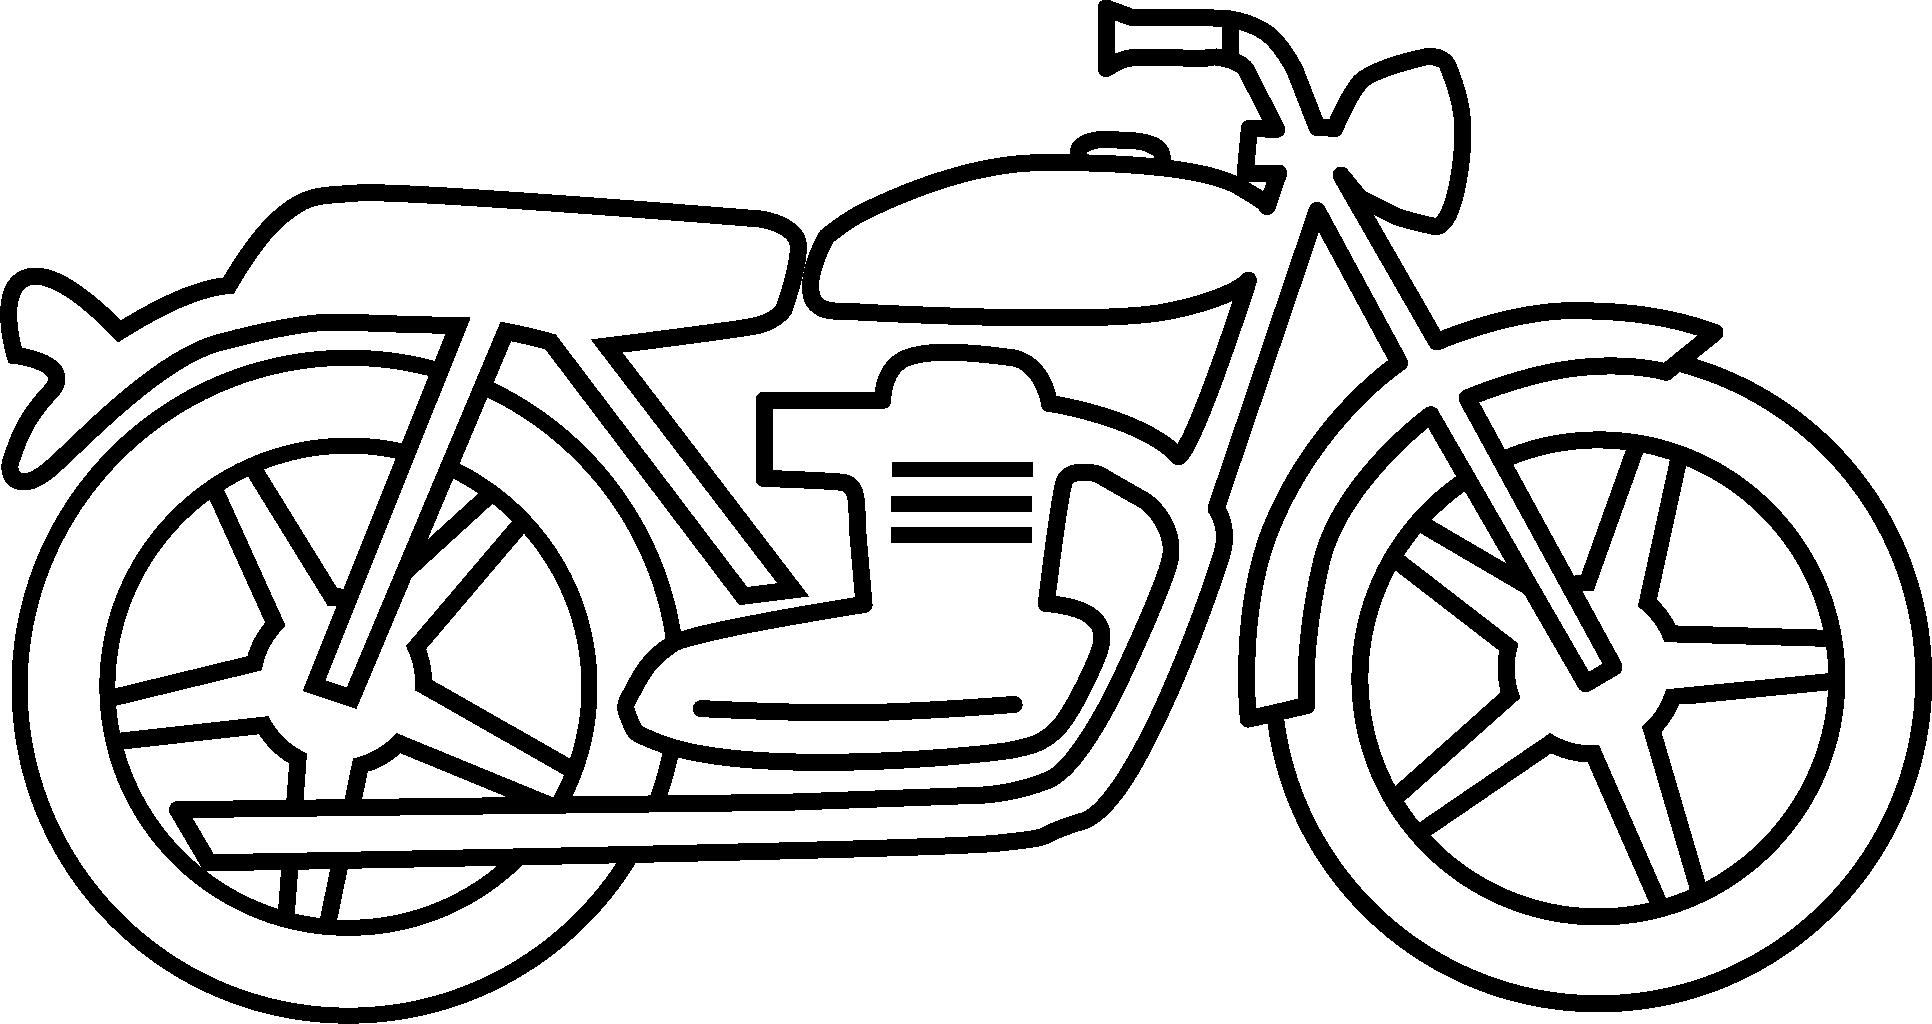 Free Motorcycle Cliparts Black, Download Free Clip Art, Free